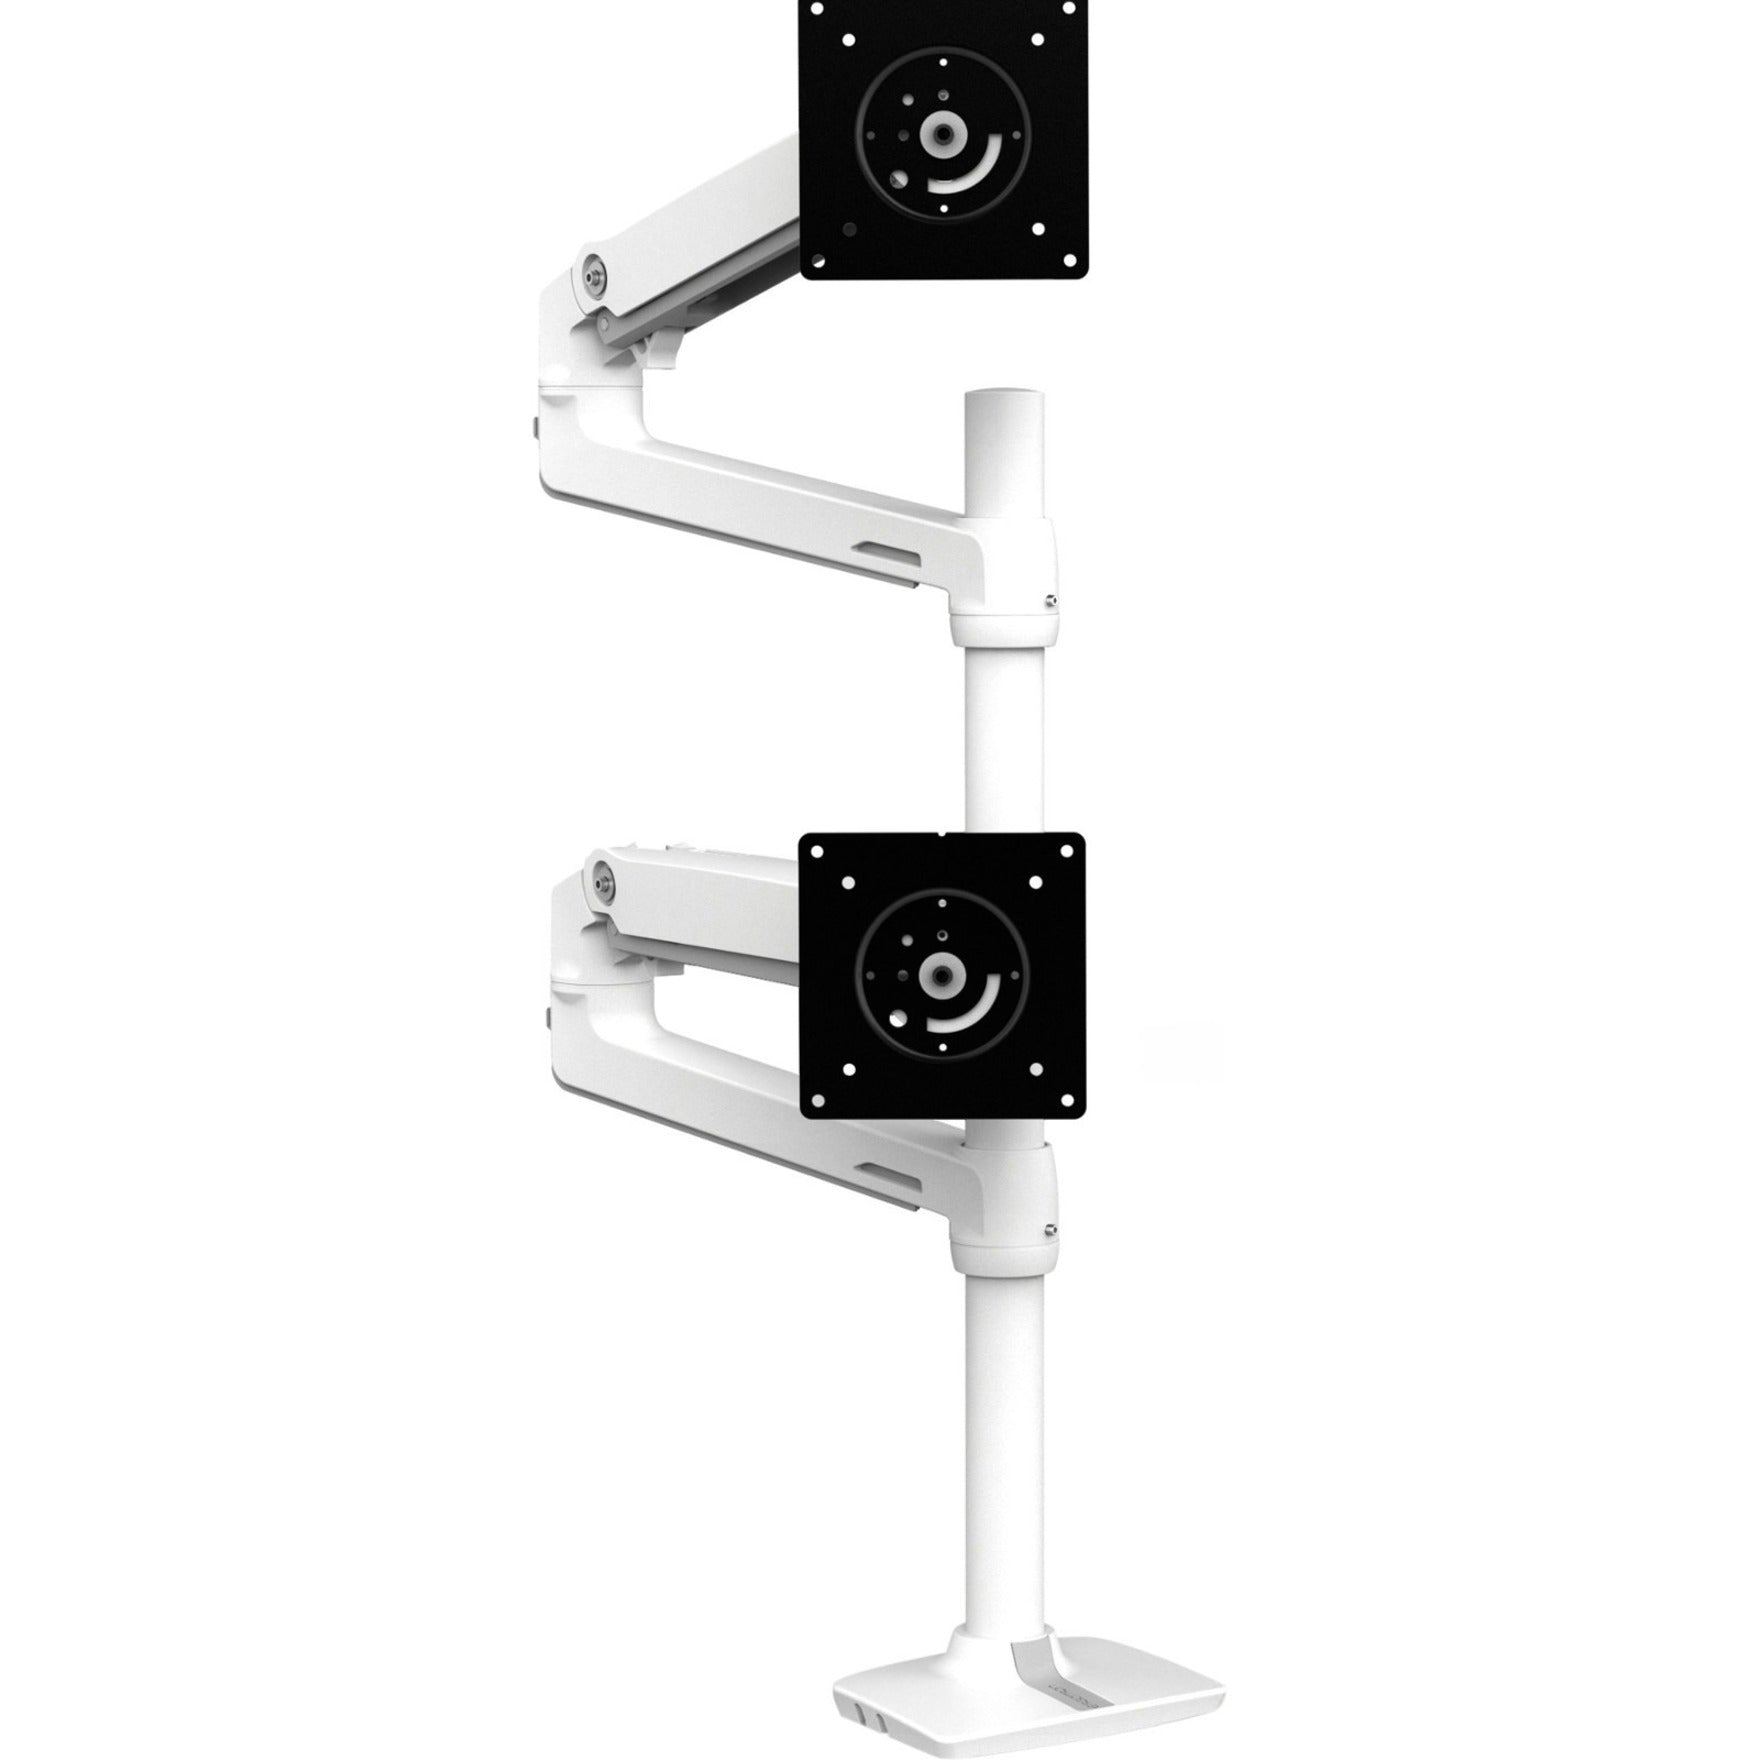 Ergotron 45-509-216 LX Dual Stacking Arm, Tall Pole (White) - Desk Mount for Monitor, 40 lb Maximum Load Capacity, 2 Displays Supported